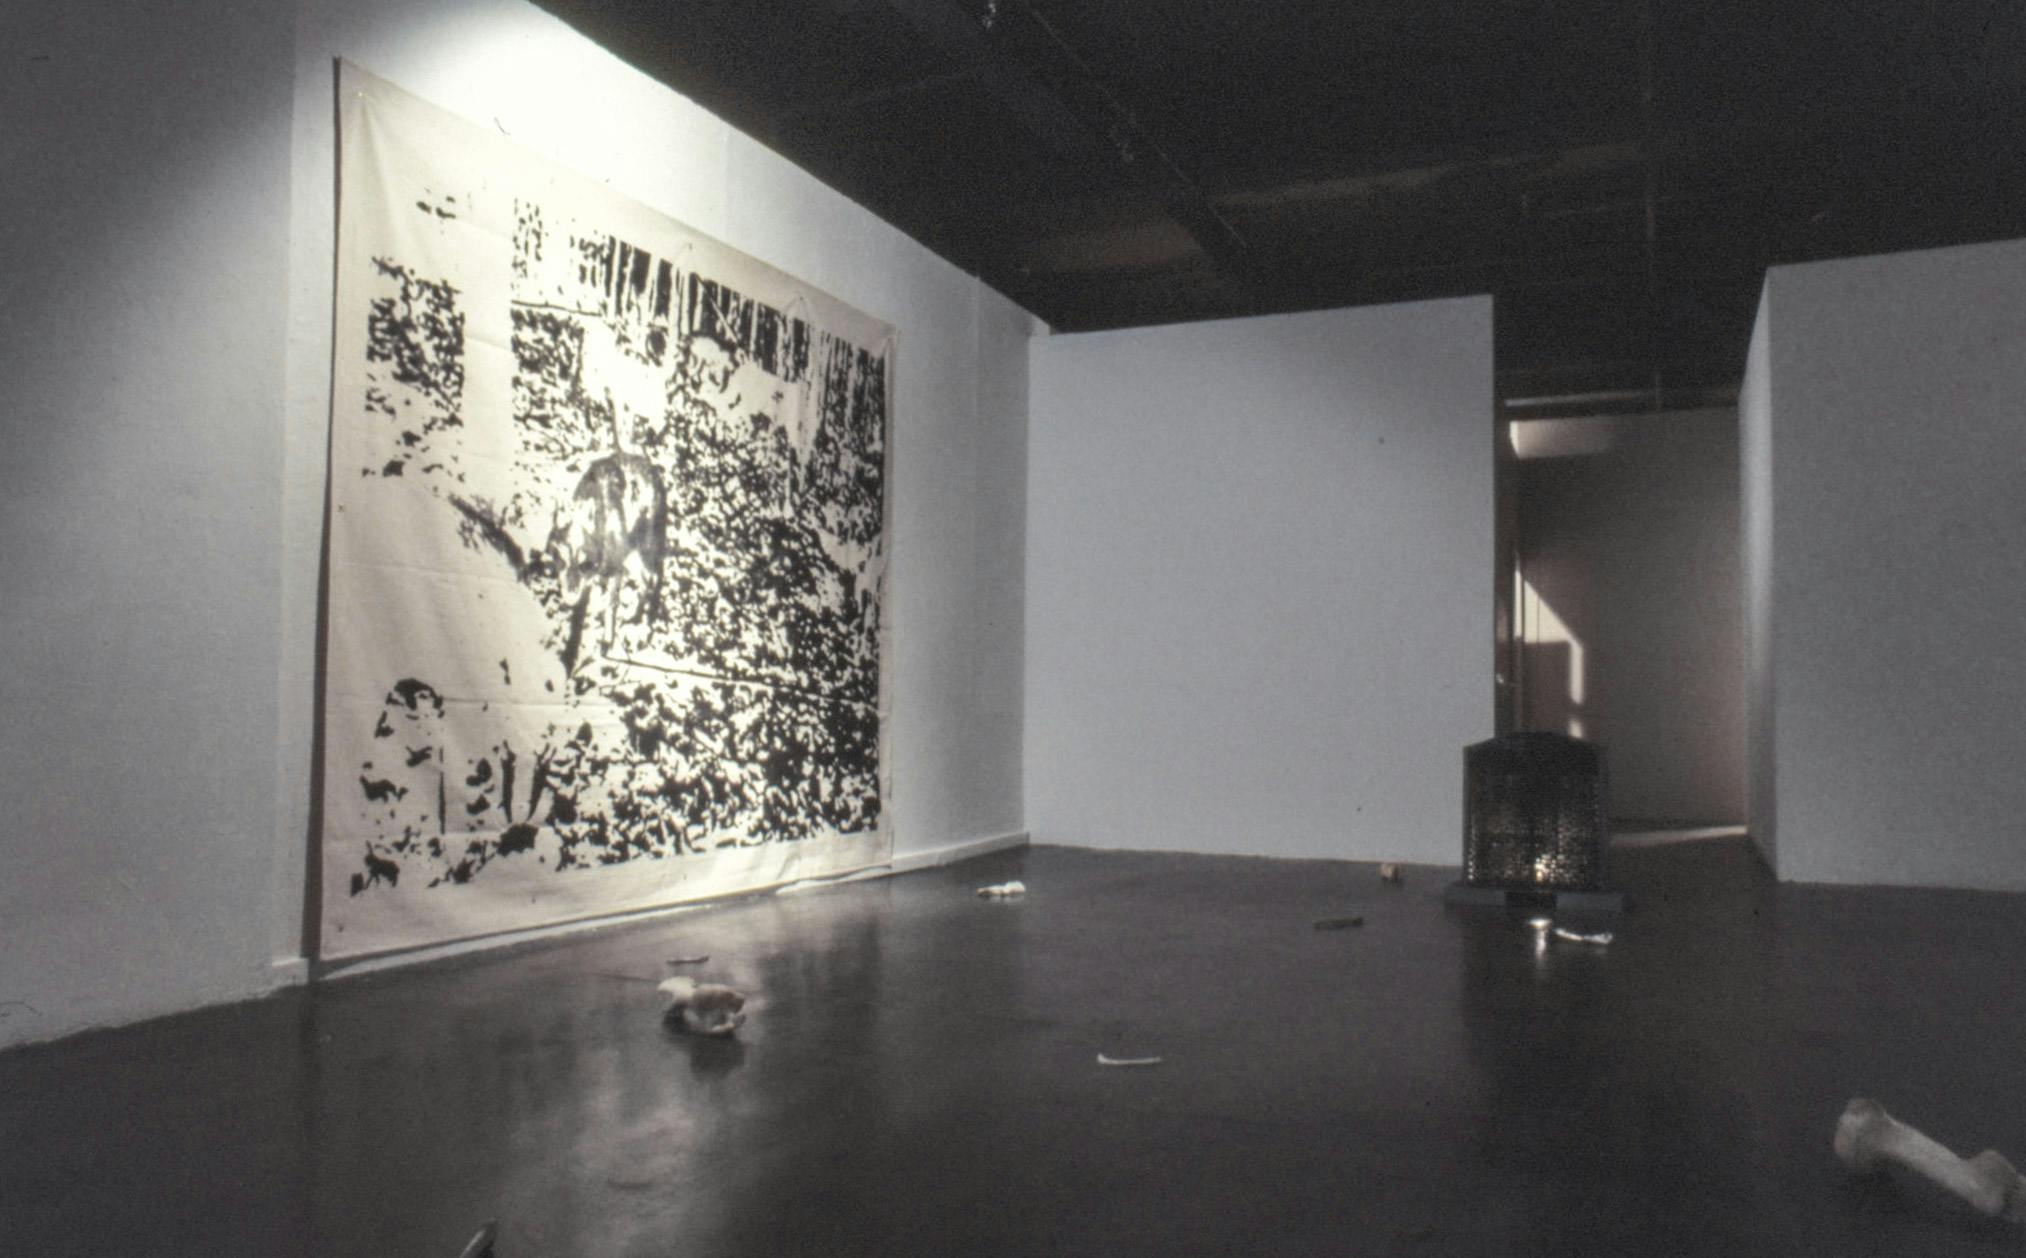 On the floor of a dark room in a gallery, there are human, animal and cast steel bones. On one wall, a very large piece of canvas shows a negative screen print of wolves in a forest.